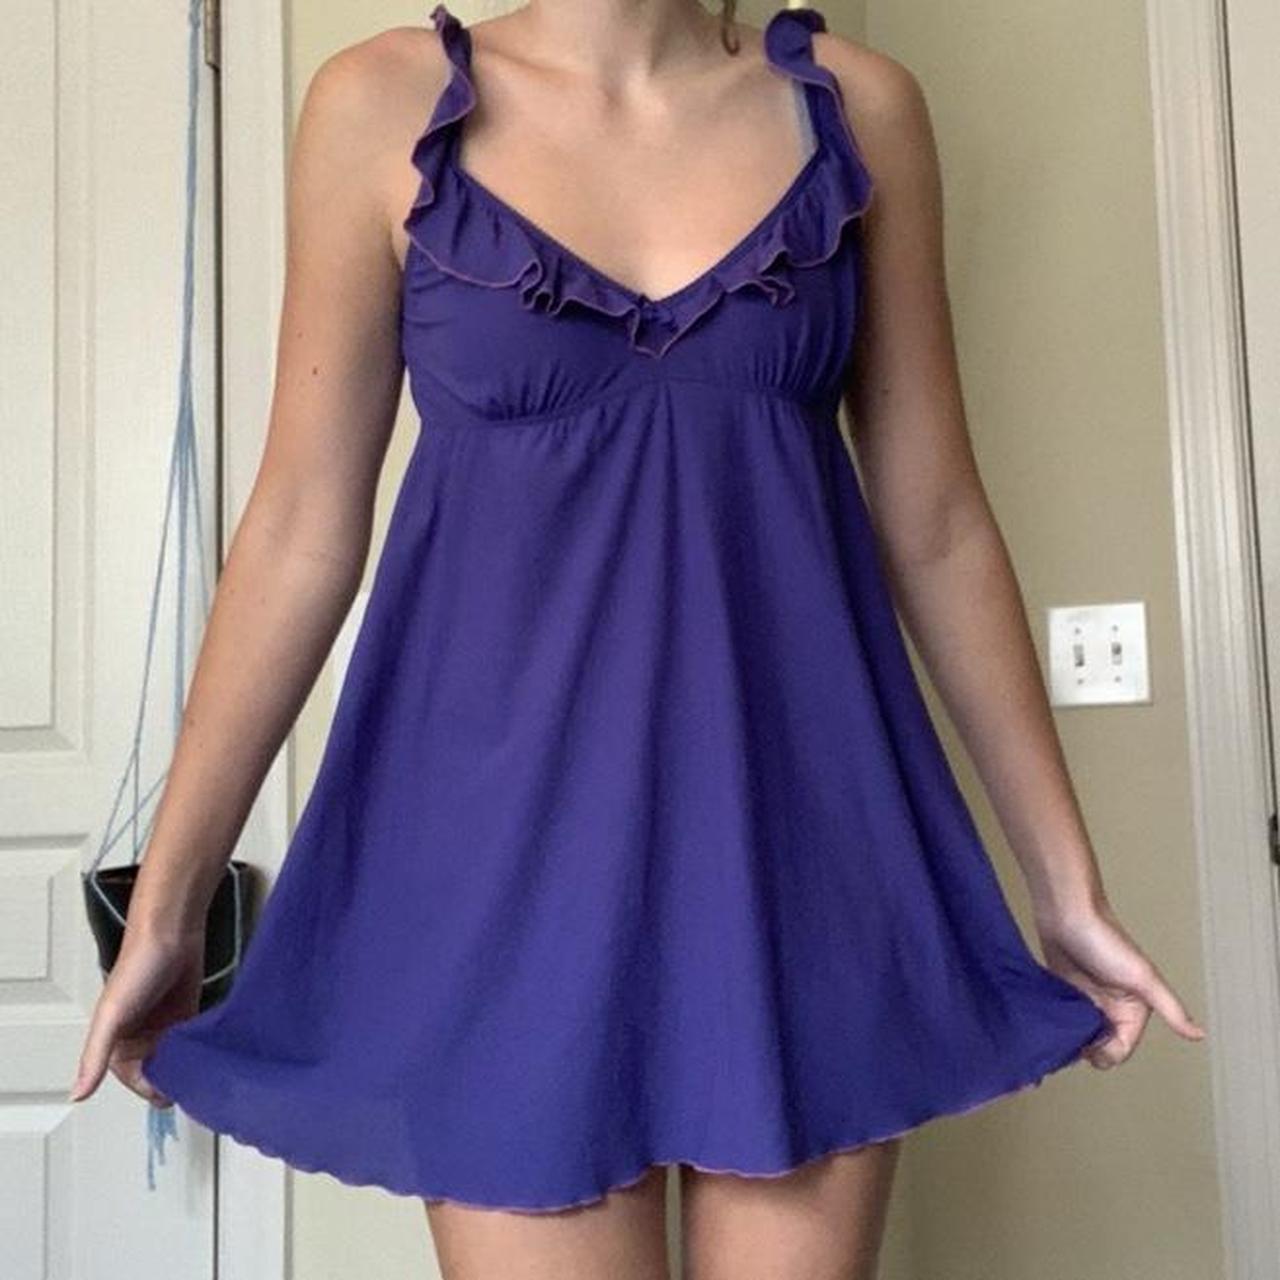 Smart and Sexy Women's Purple and Pink Dress (4)